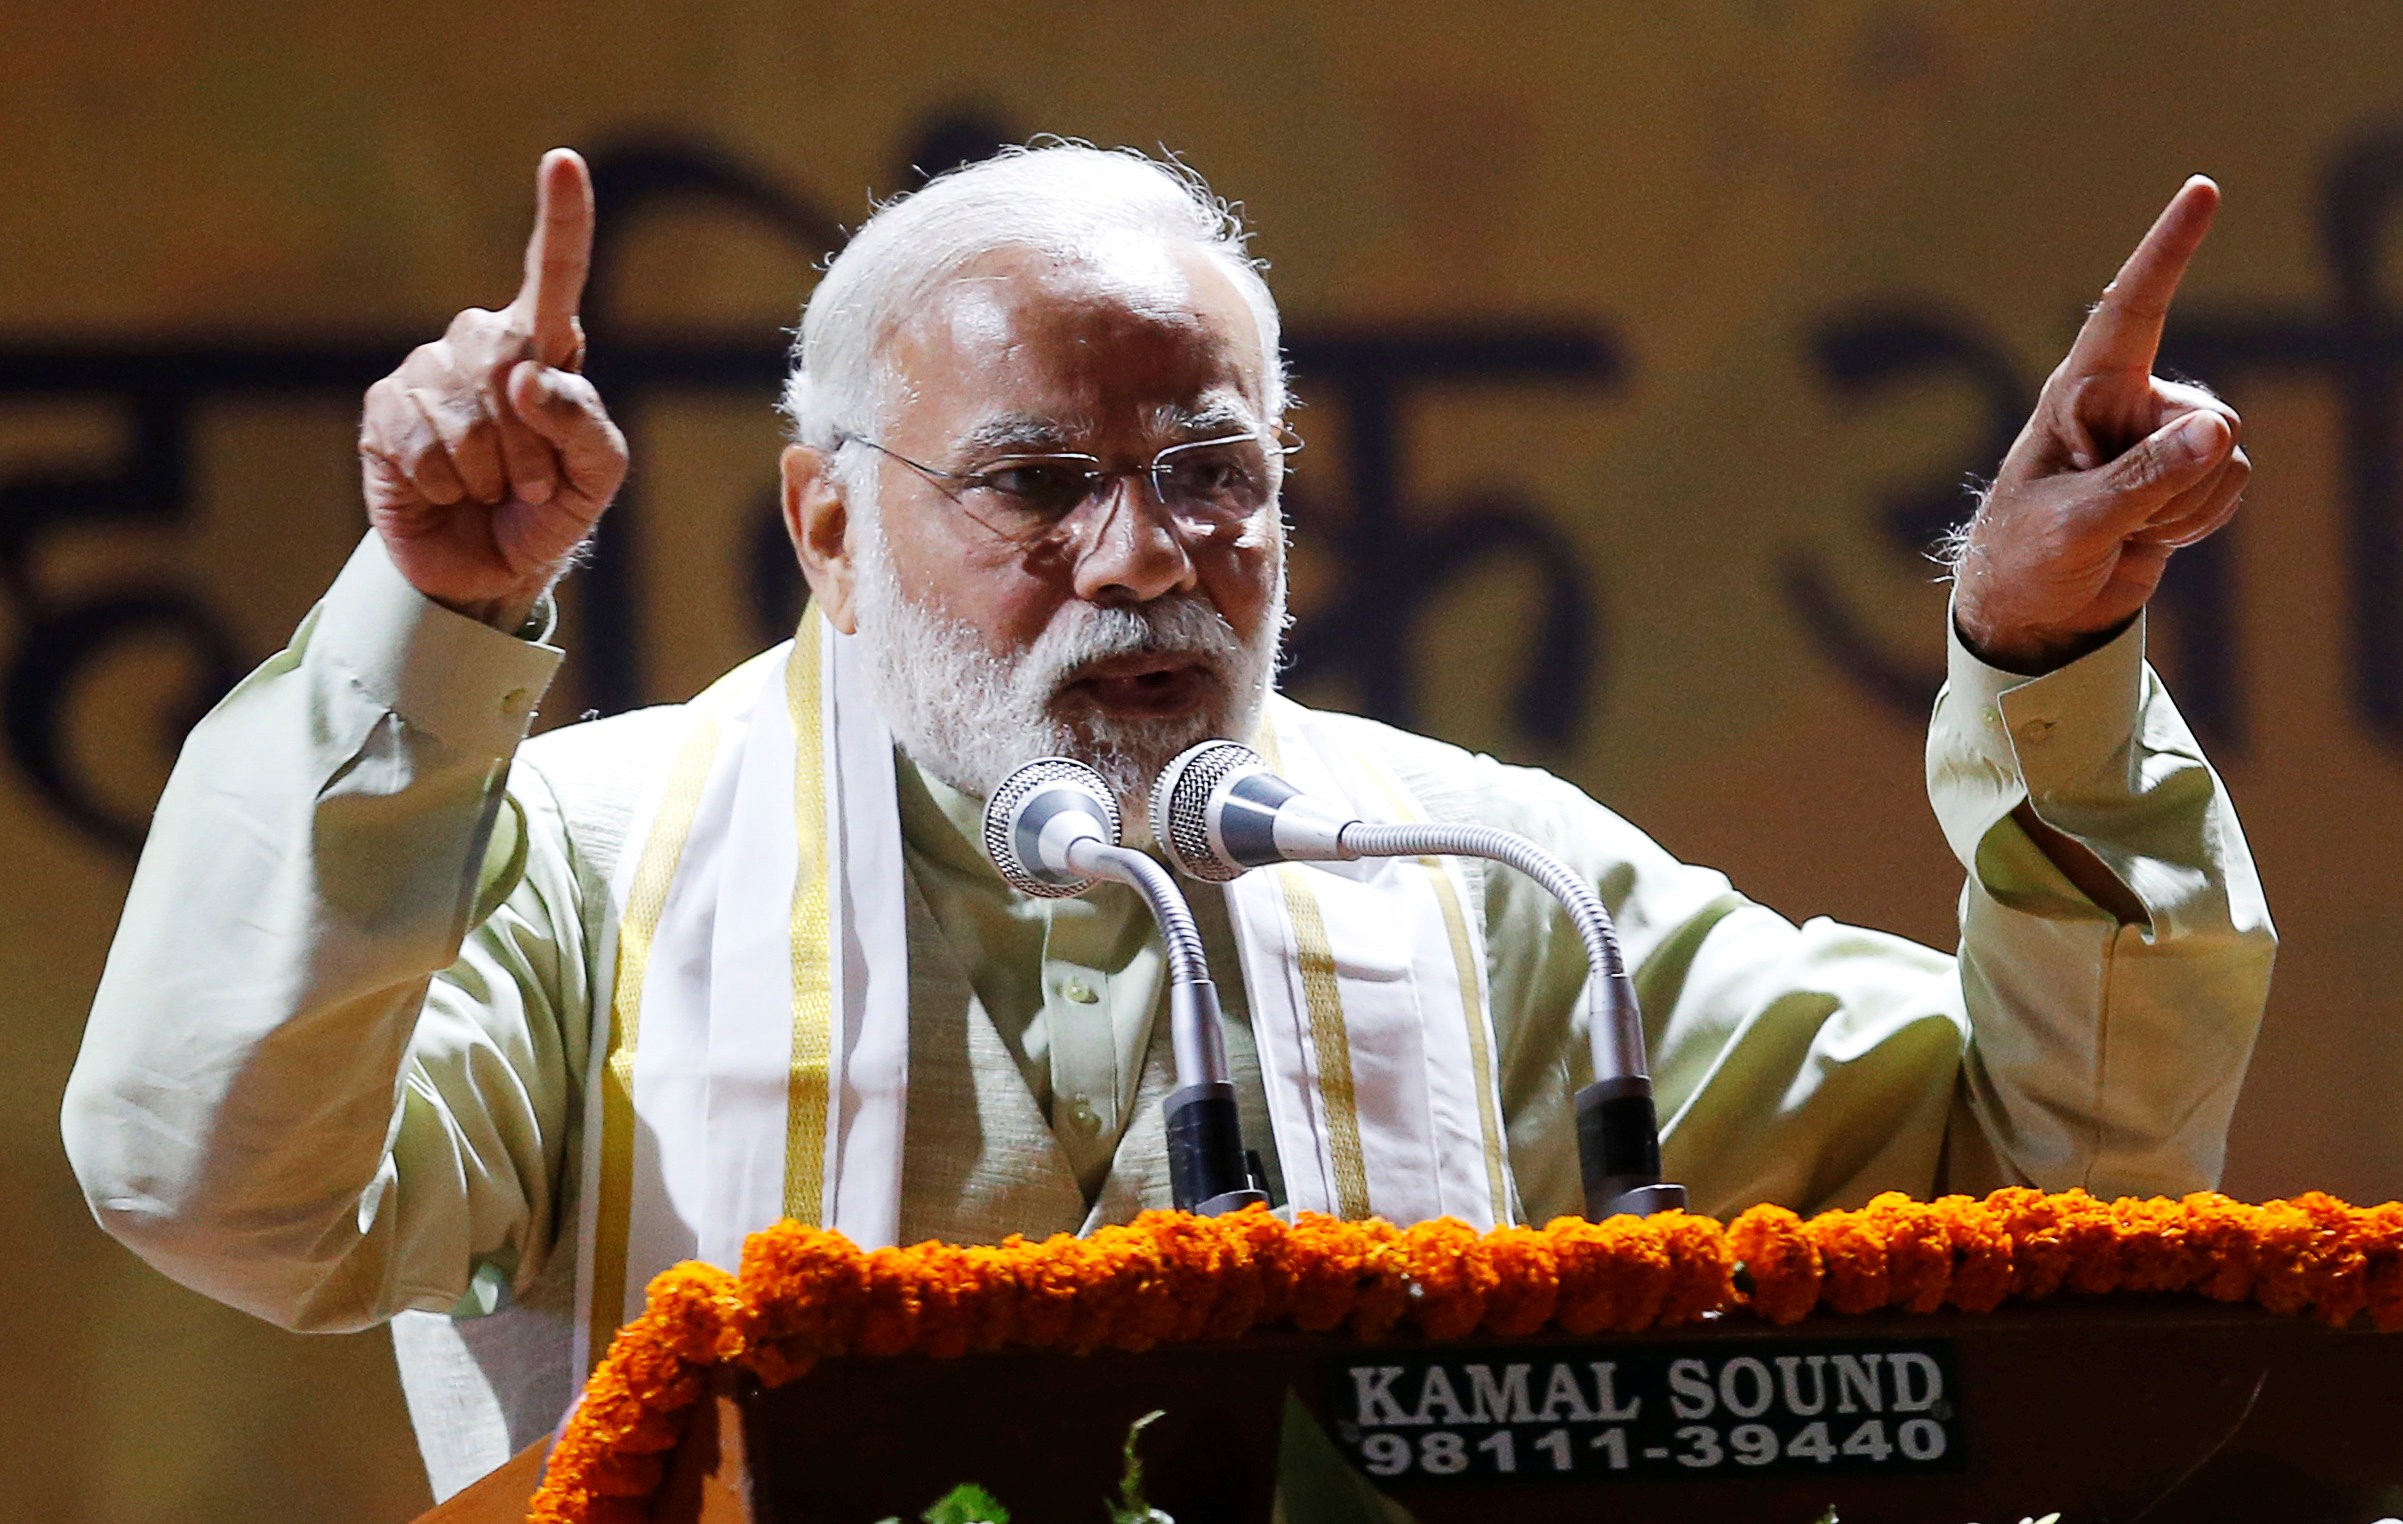 A Cambridge Analytica whistleblower has said firm had done “extensive” work in Indian politics in the past decade, but would not say if Prime Minister Narendra Modi was involved. Photo: Reuters 